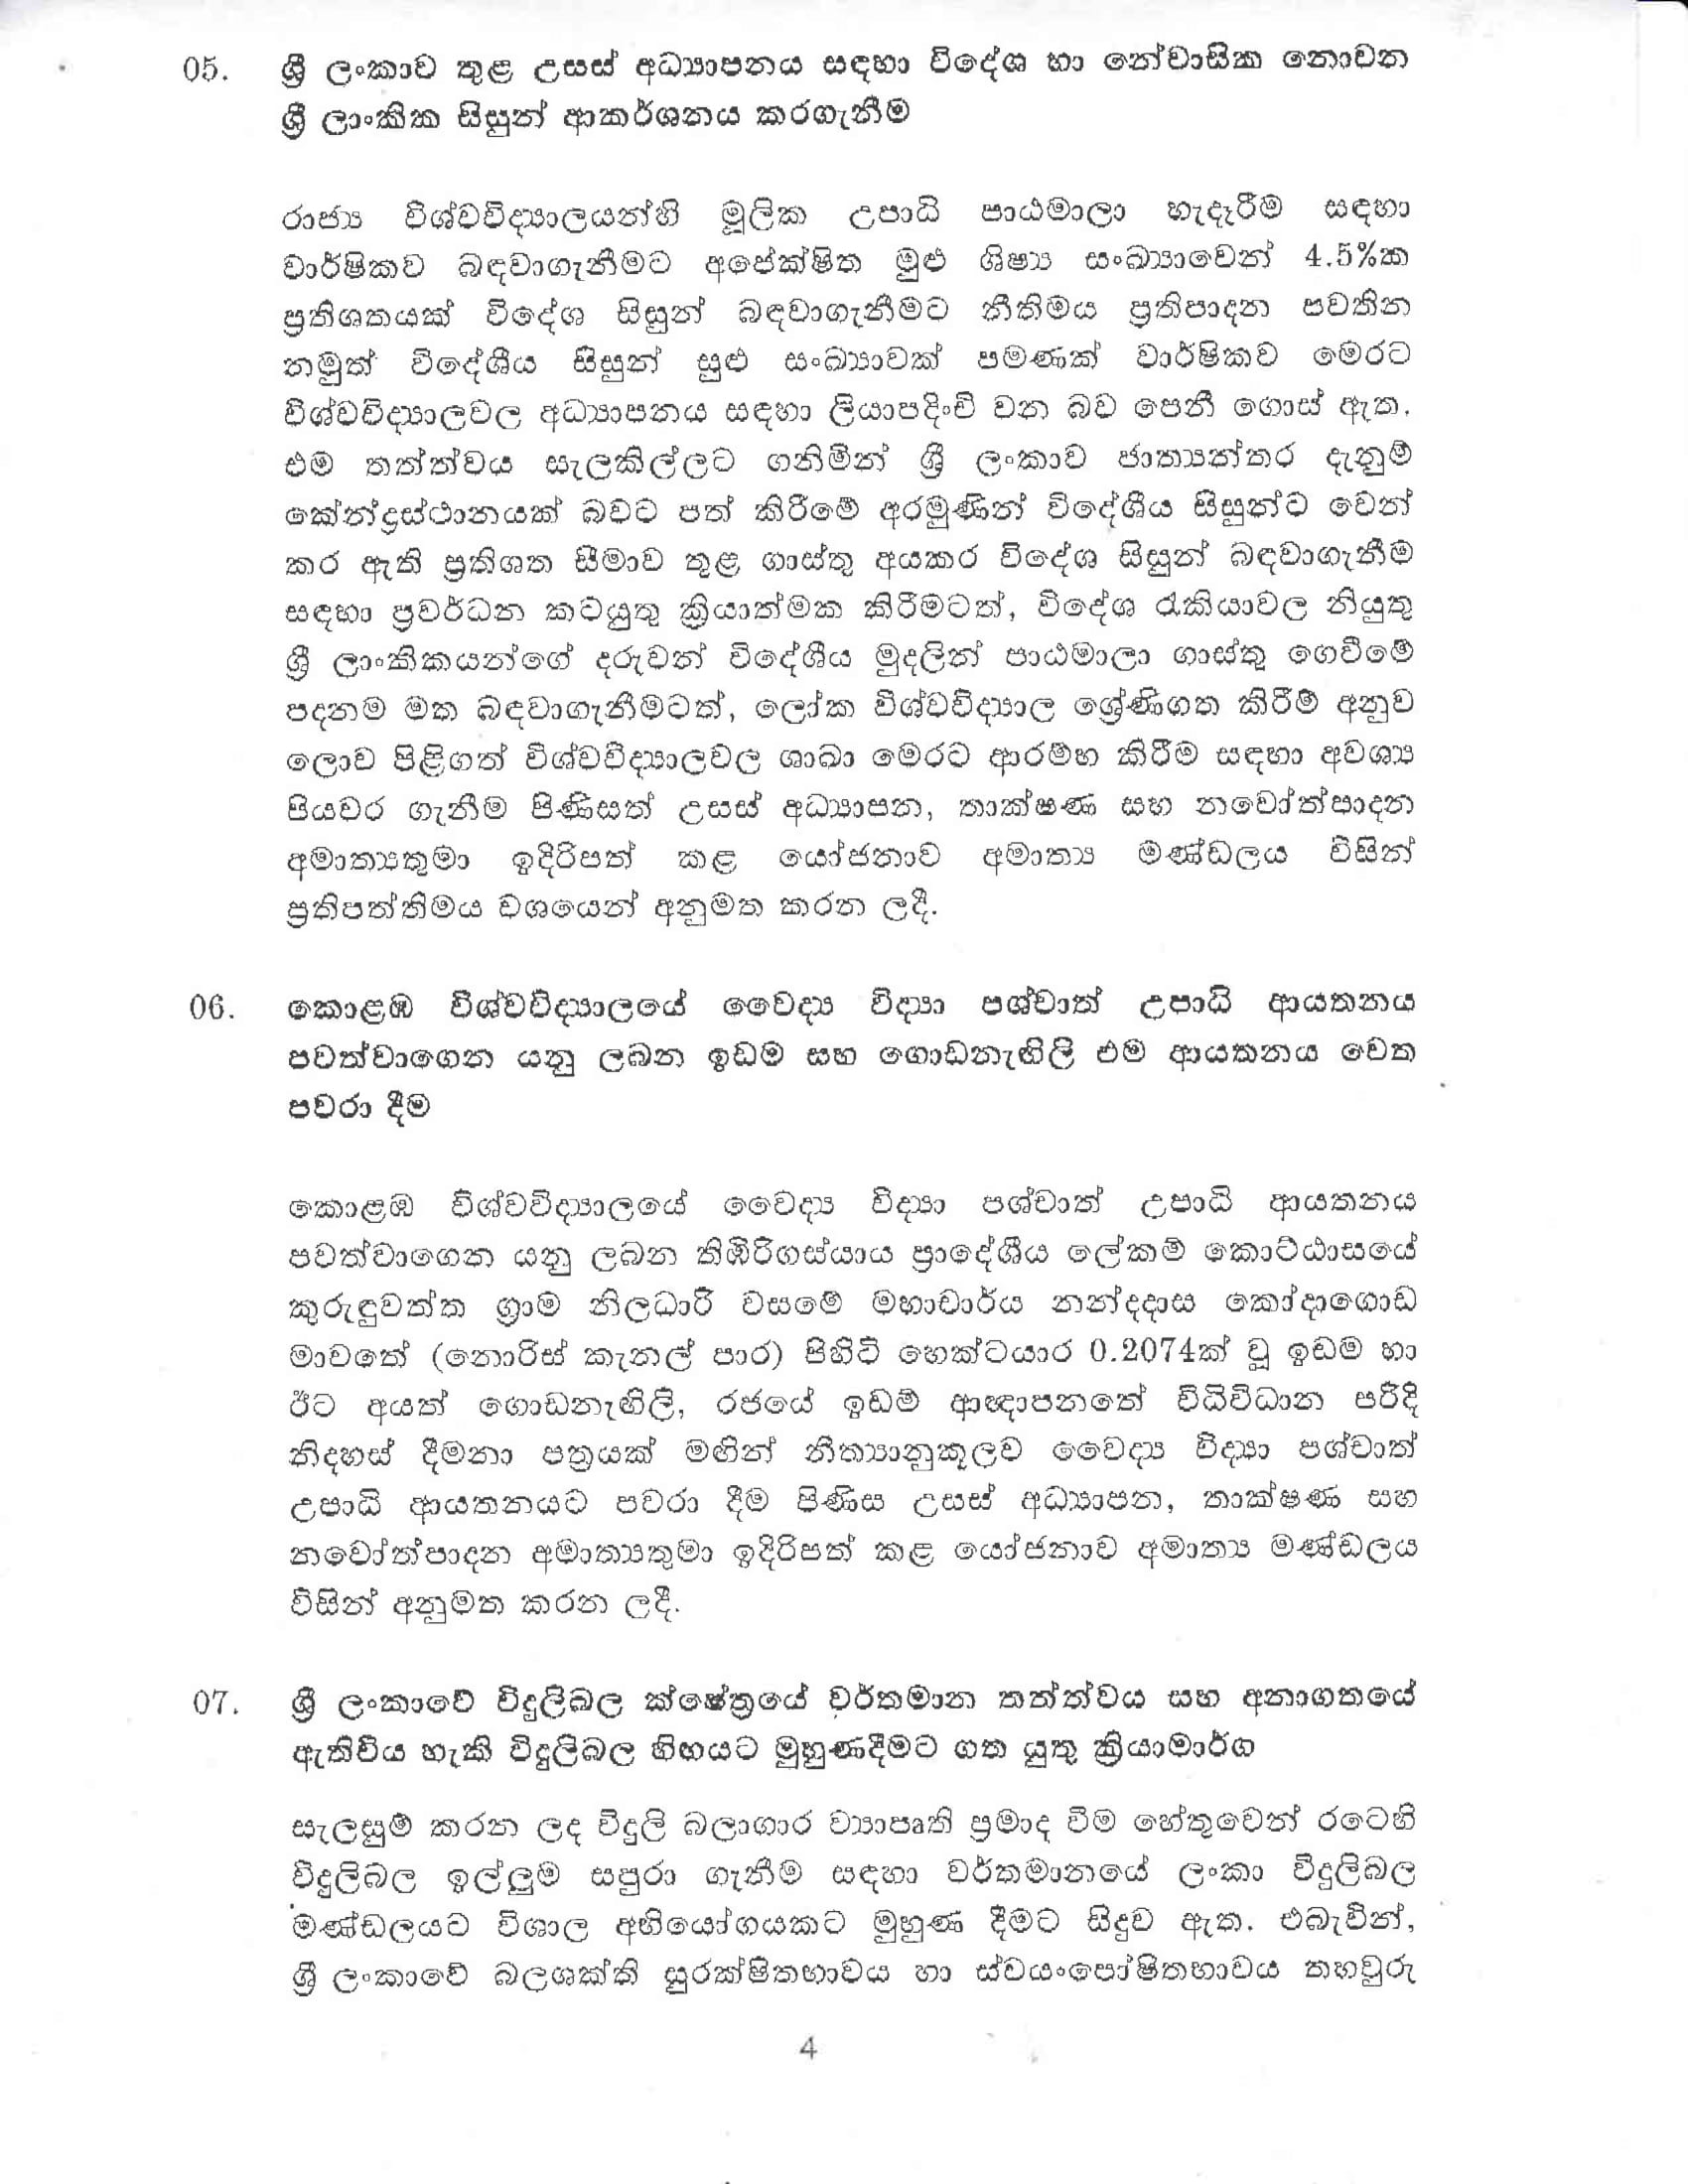 Cabinet Decision on 22.01.2020Full document 4